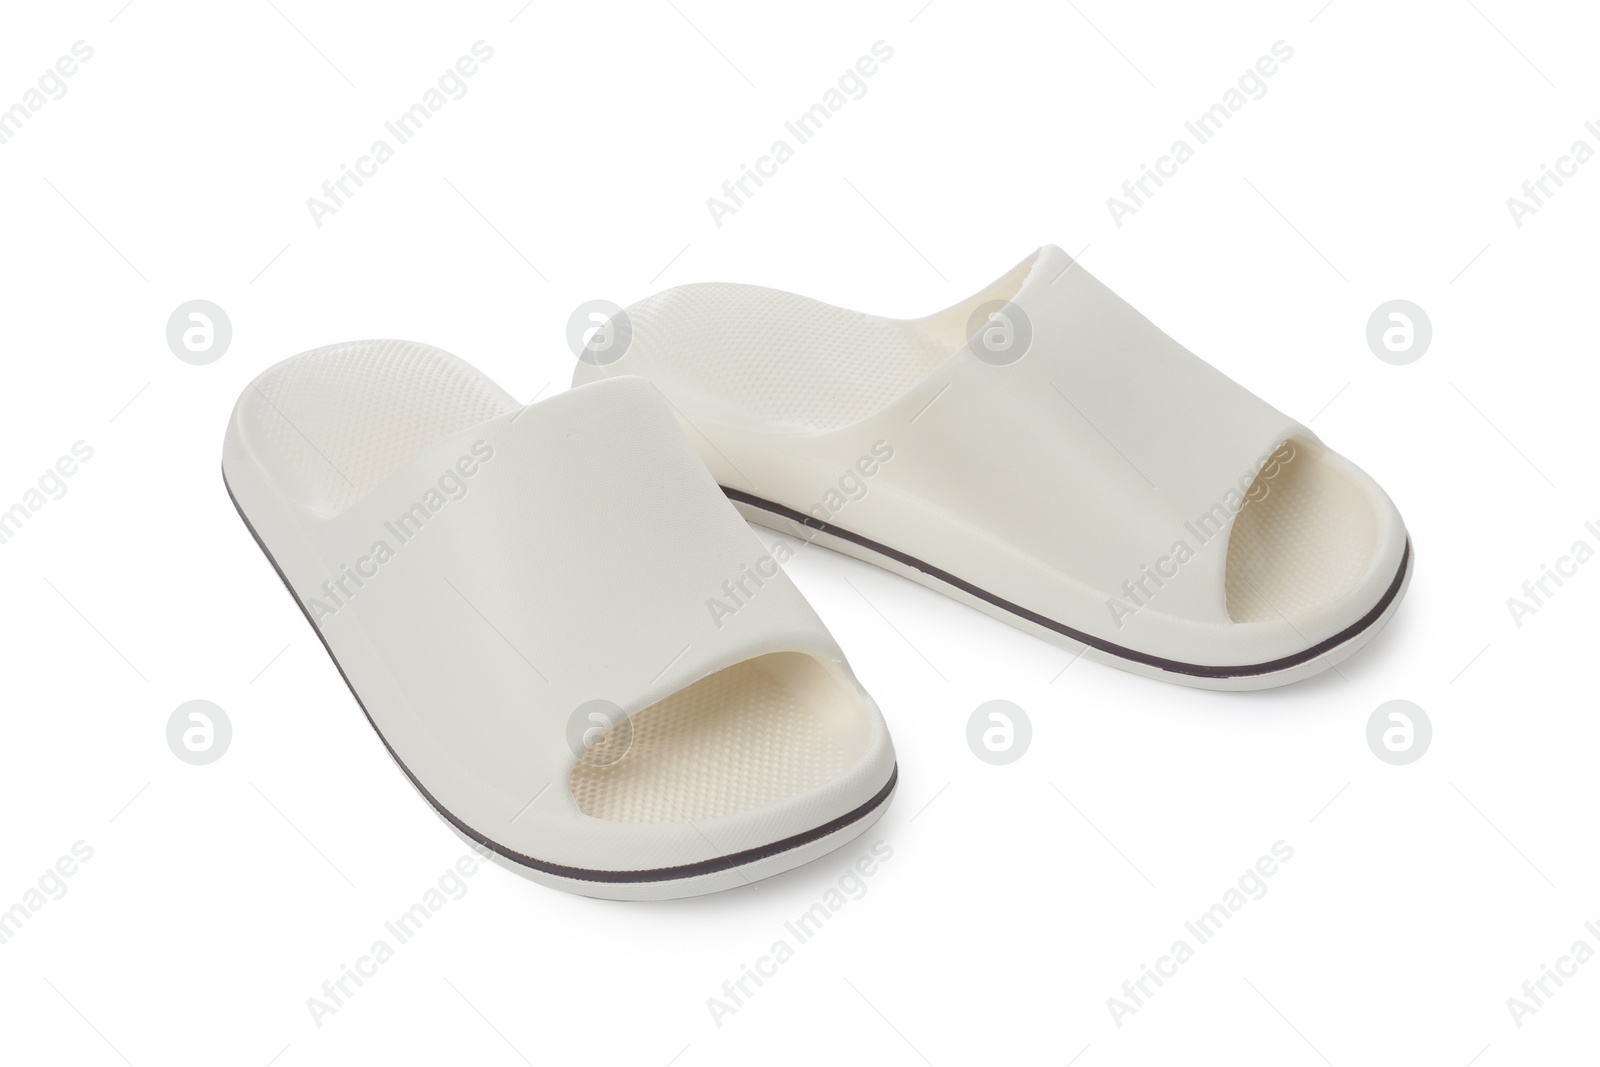 Photo of Pair of rubber slippers isolated on white